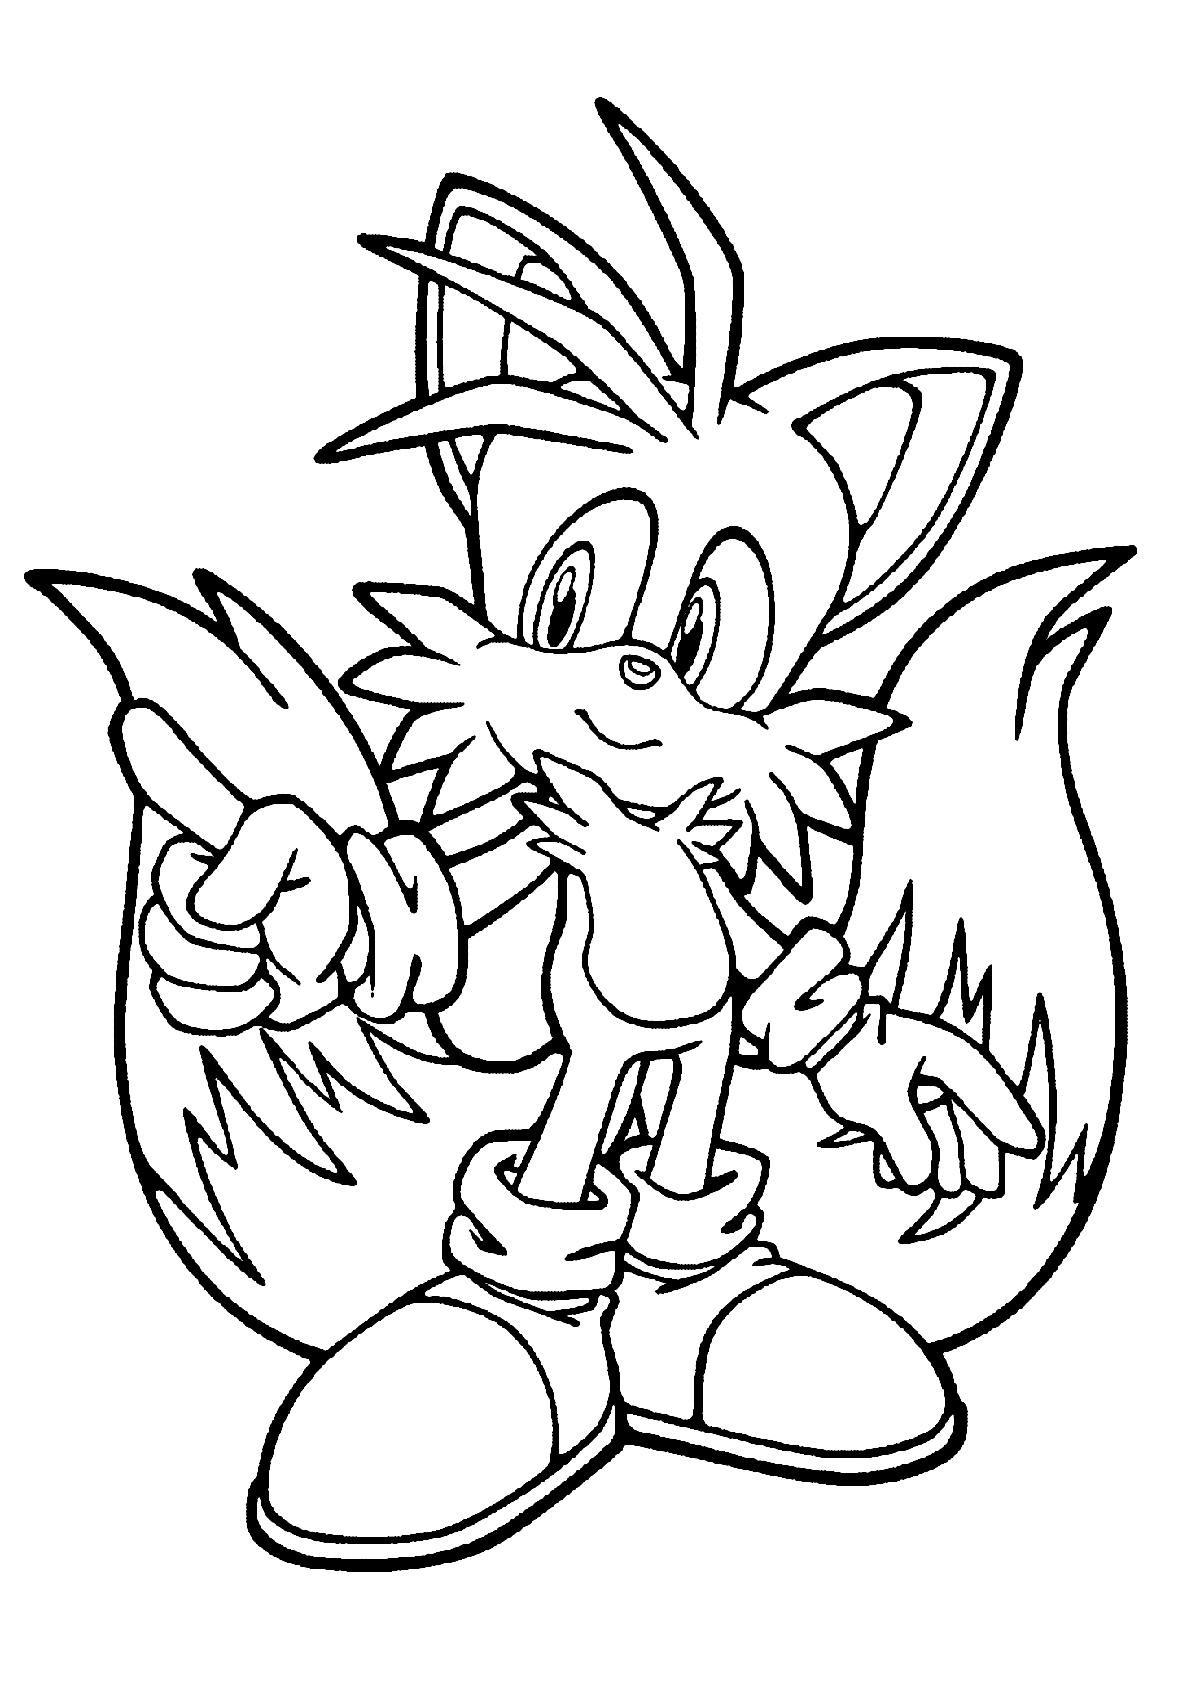 Coloring Page Sonic X Sonic X Coloring Pages To Print And Color | Sexiz Pix